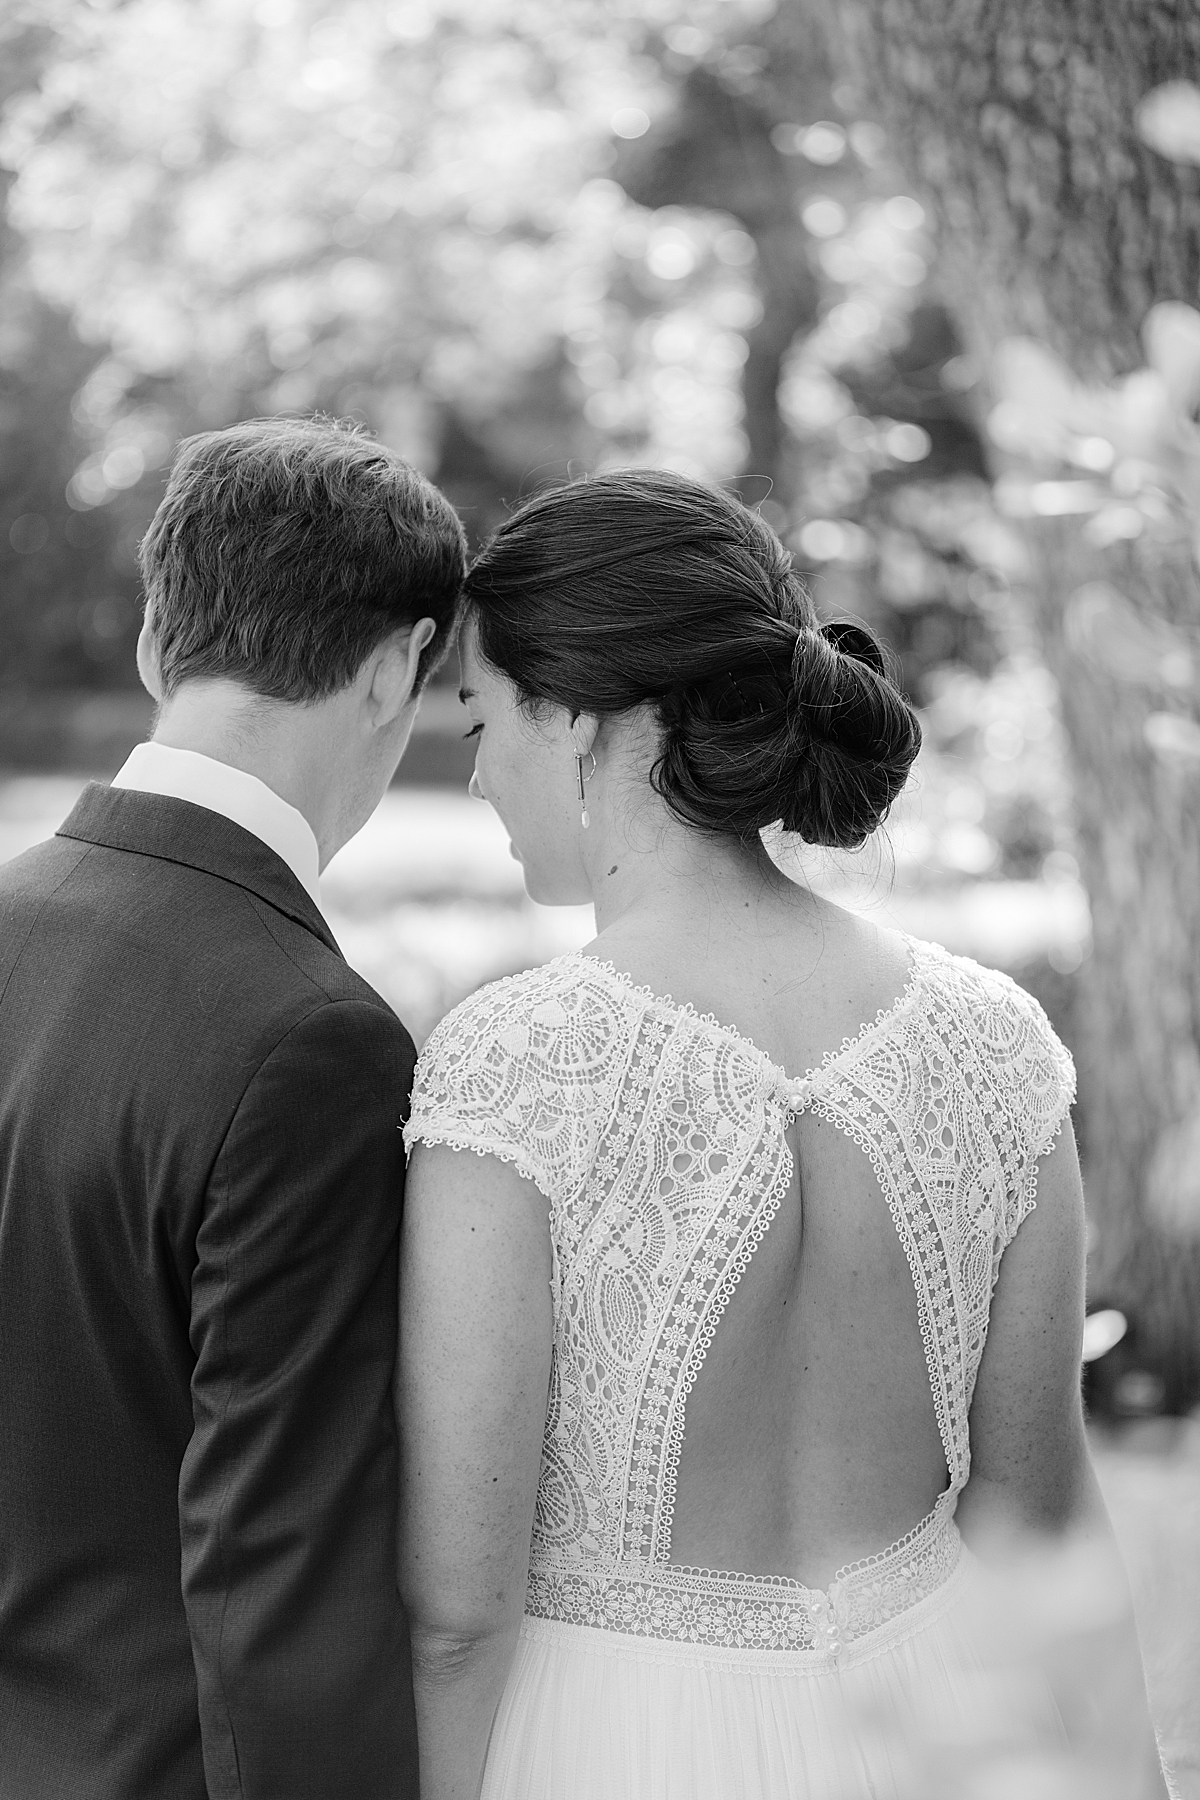 Katharine & John touching foreheads as they hold hands during their private estate wedding in Ojai, California